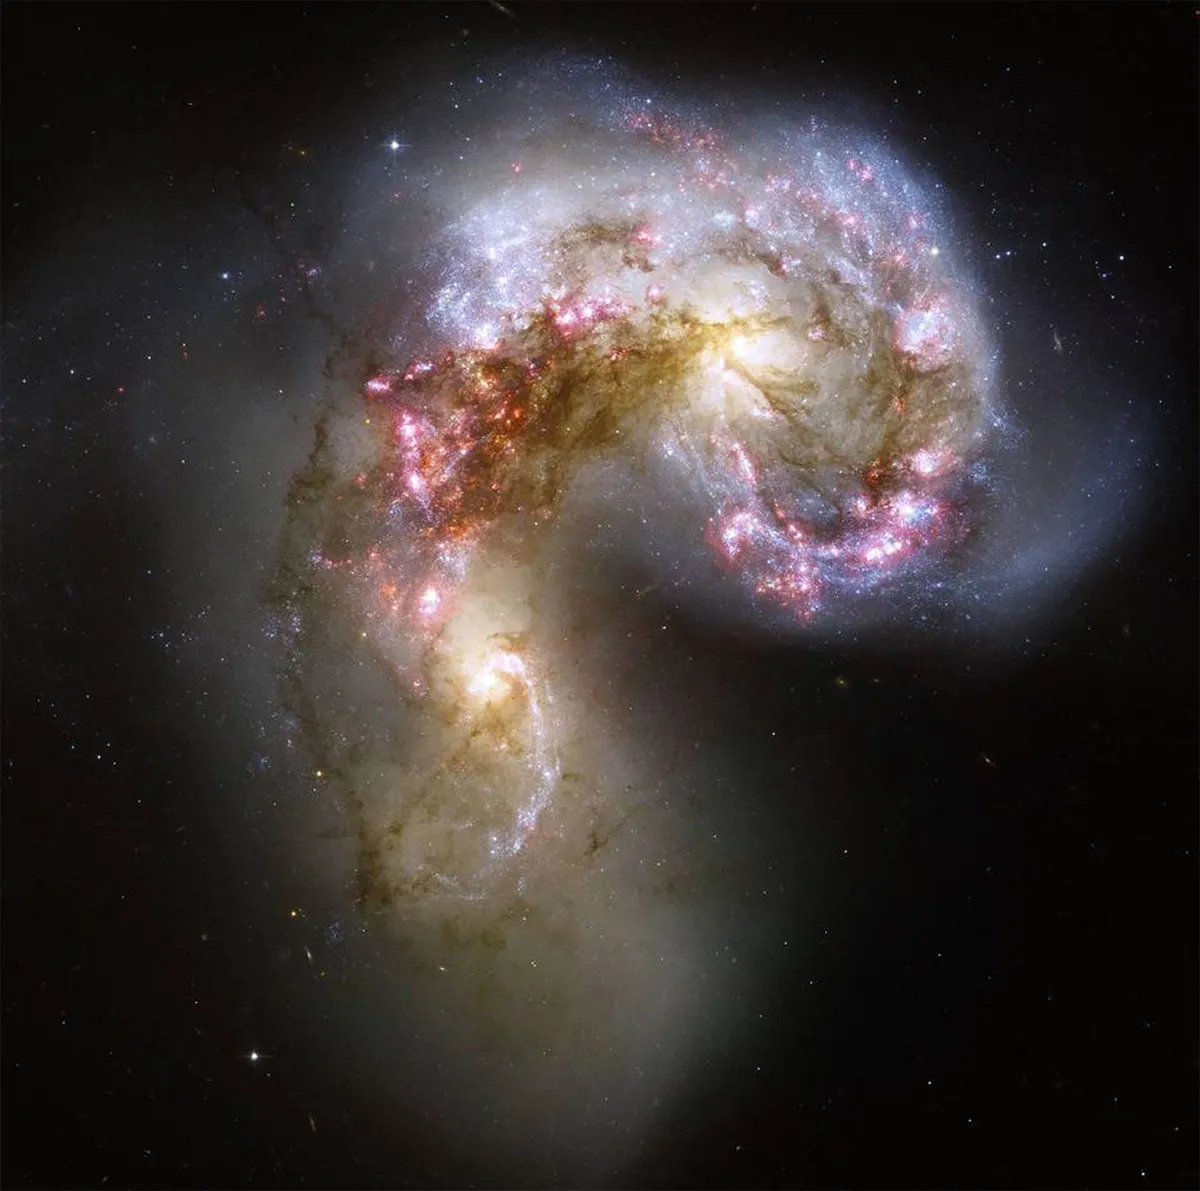 The Antennae Galaxies. These two galaxies started to interact millions of years ago and will eventually merge together into one. Credit: NASA/ESA/Hubble Heritage Team (STScI/AURA)-ESA/Hubble Collaboration